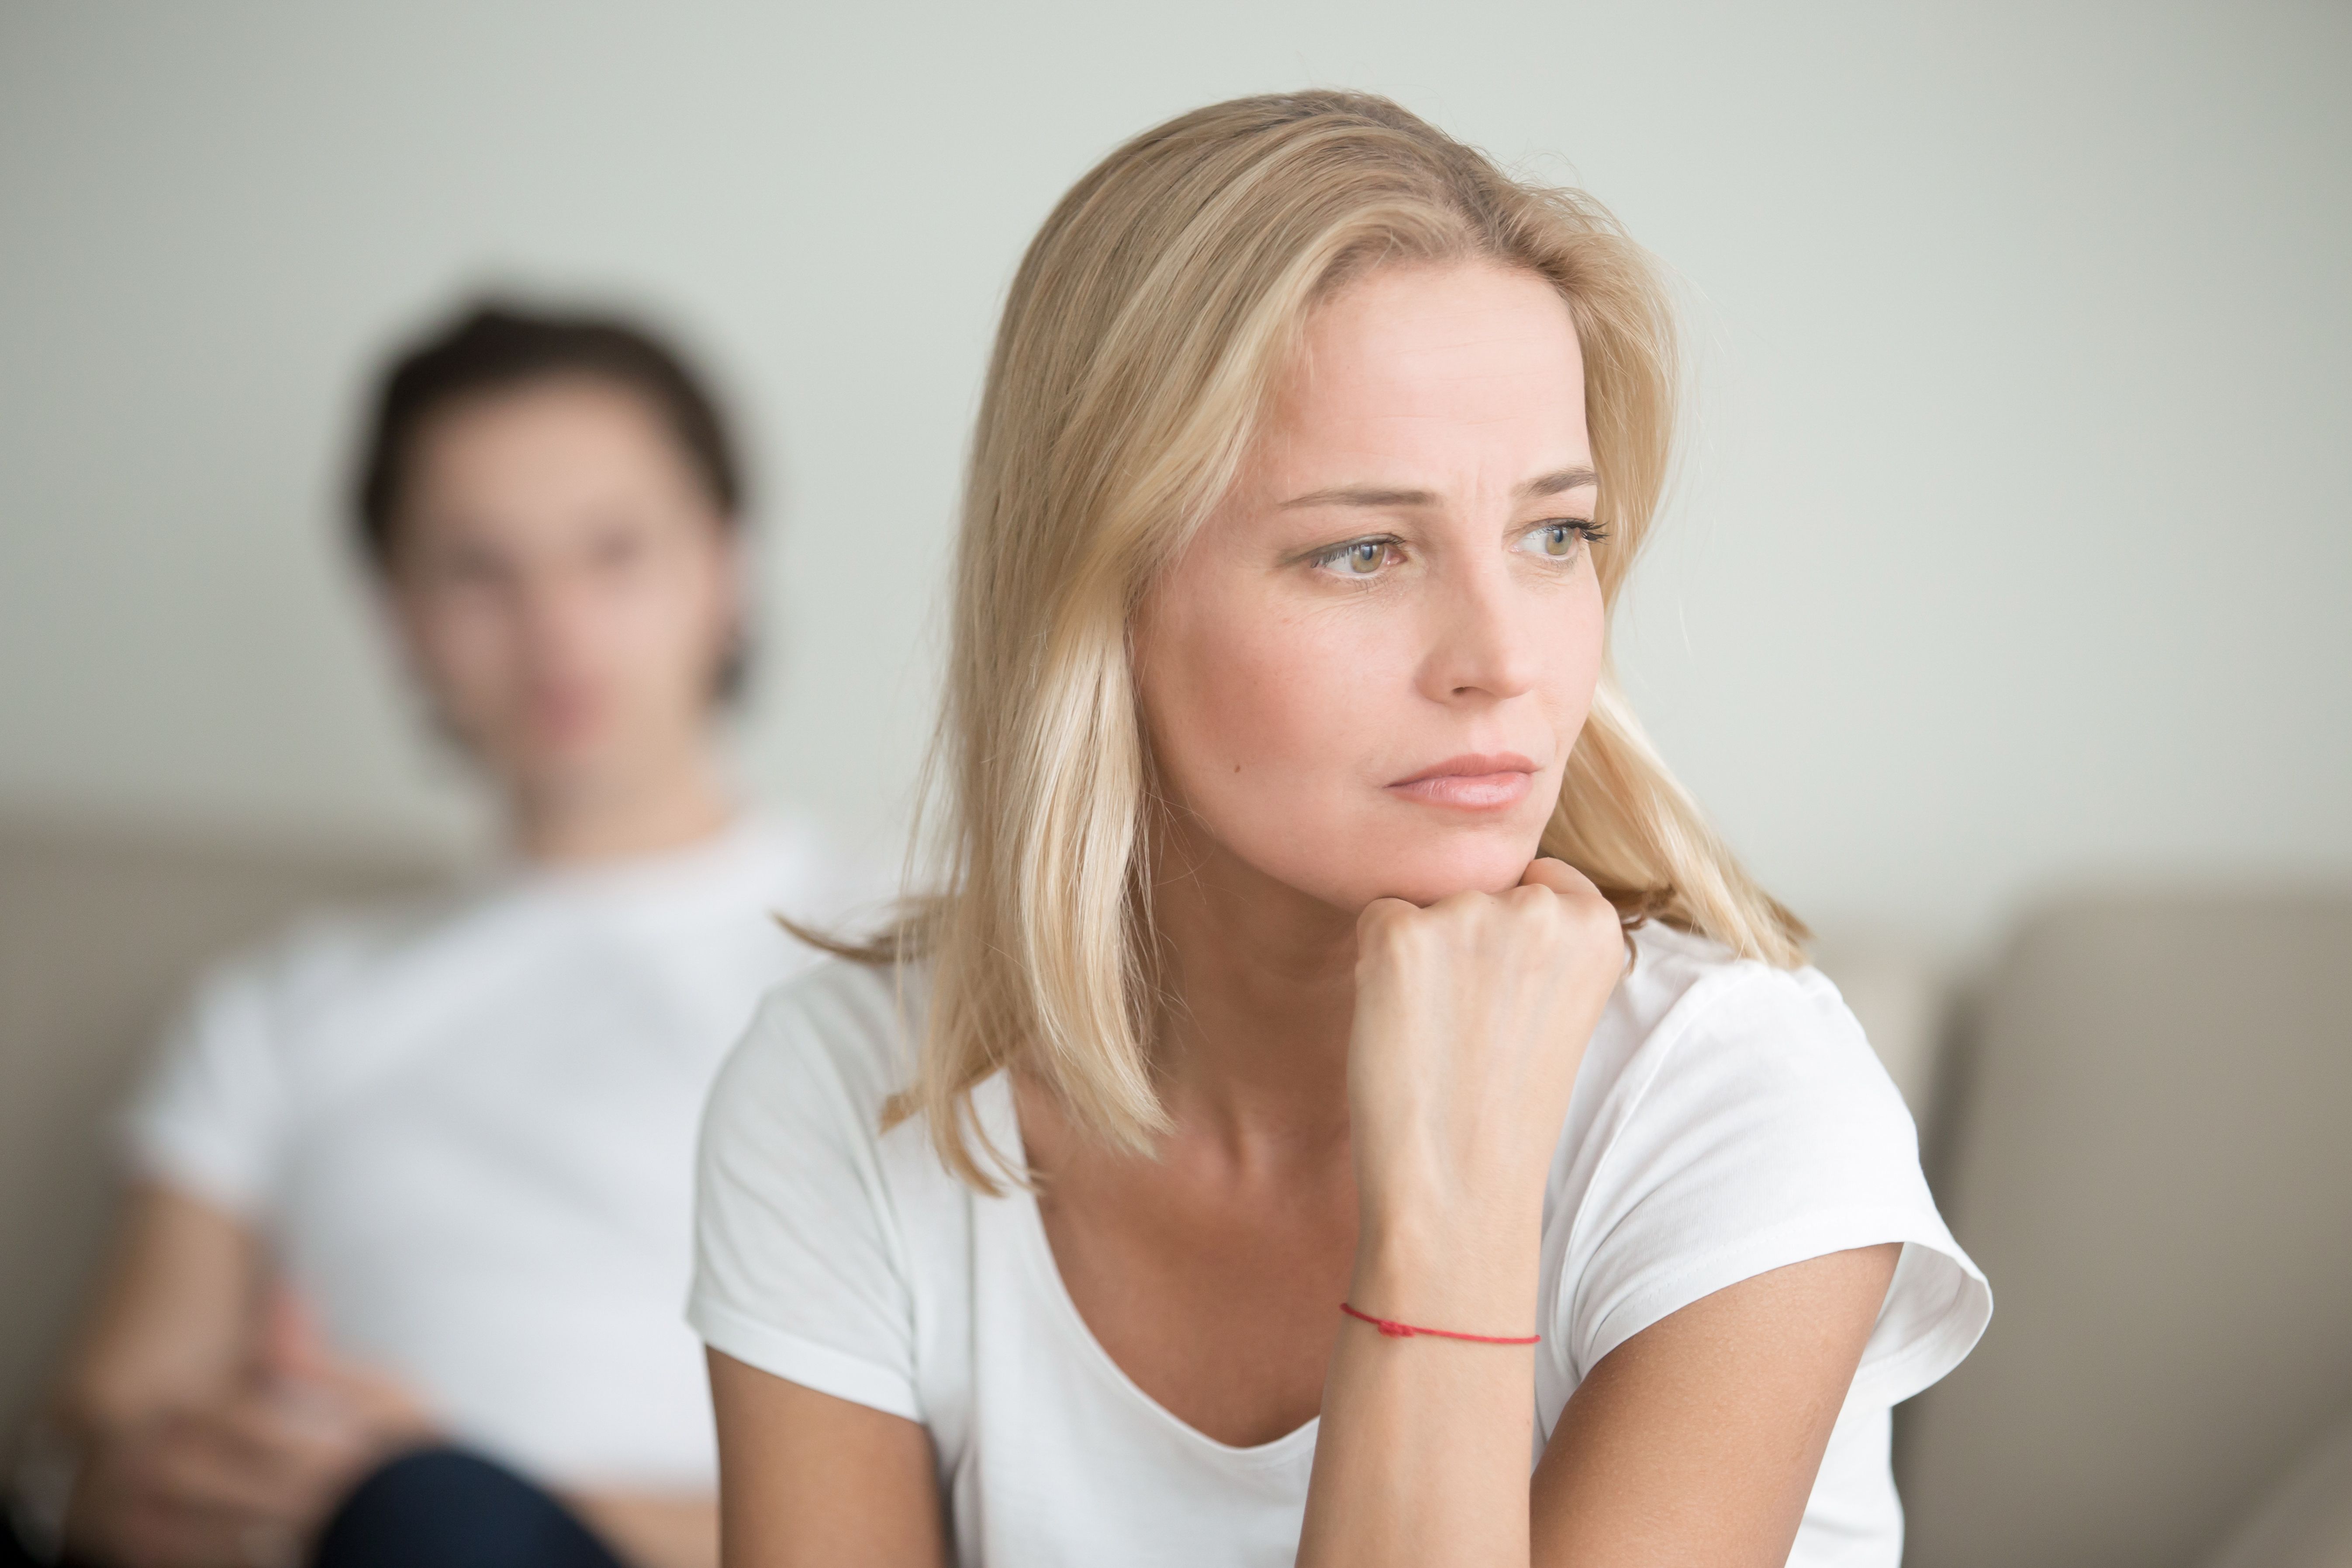 A woman thinking deeply while a man sits near her. | Source: Shutterstock